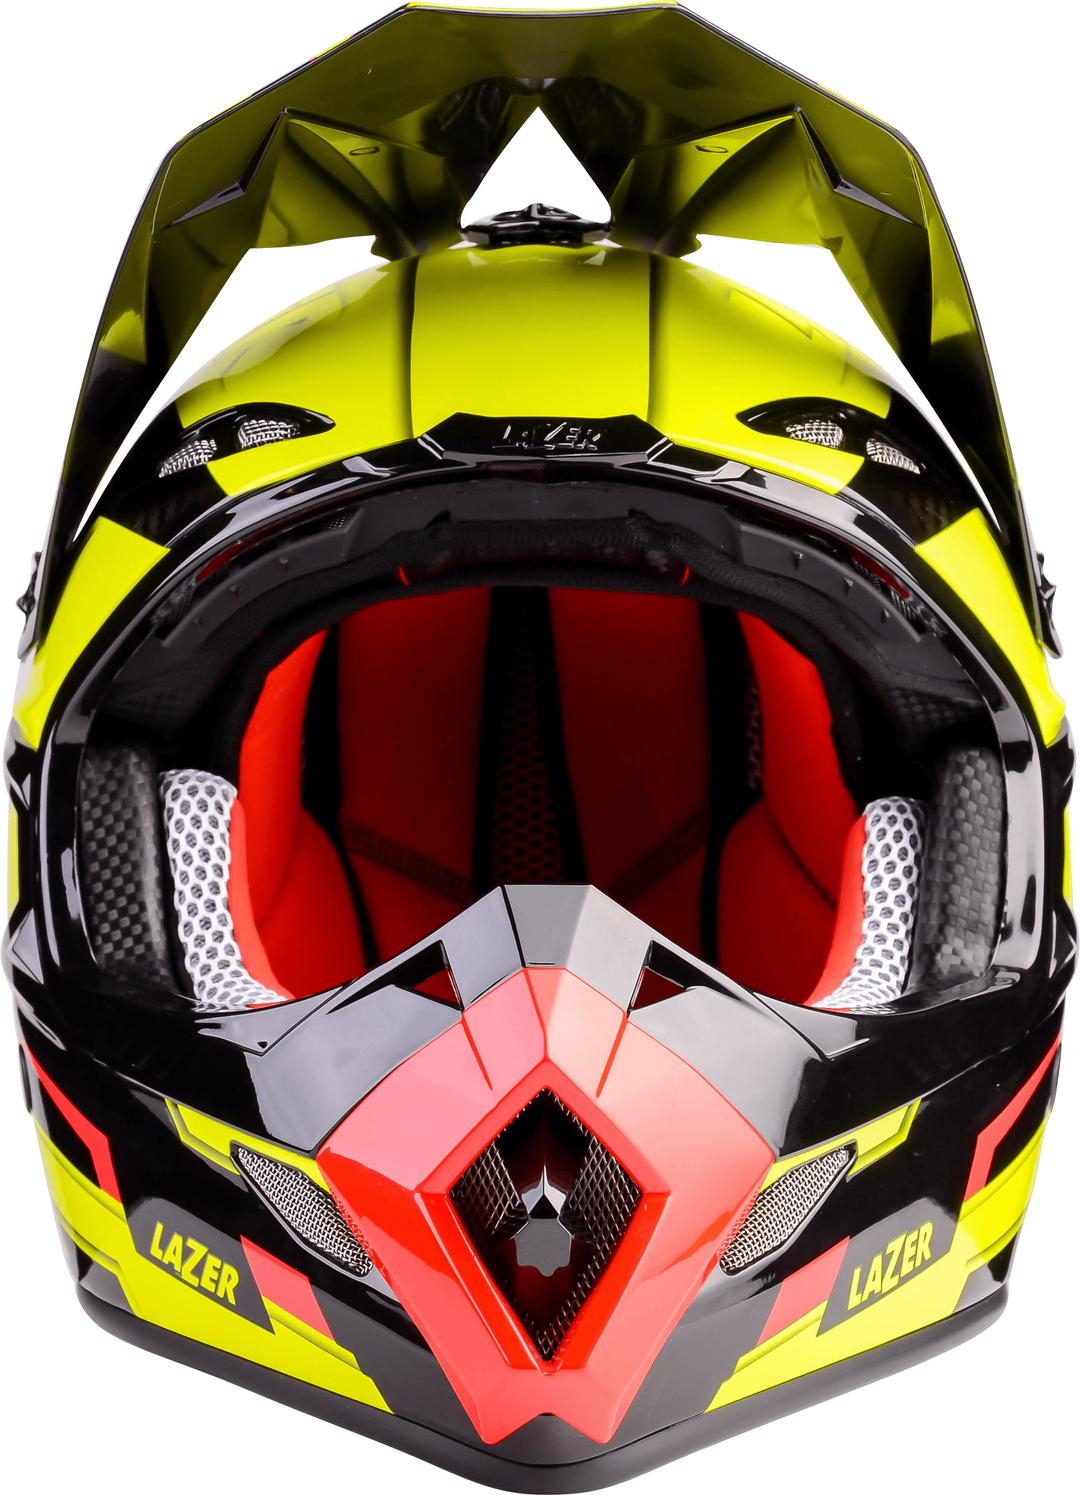 Motorcycle Helmet Lazer MX8 Geotech Pure Carbon Yellow Black Red Front png transparent